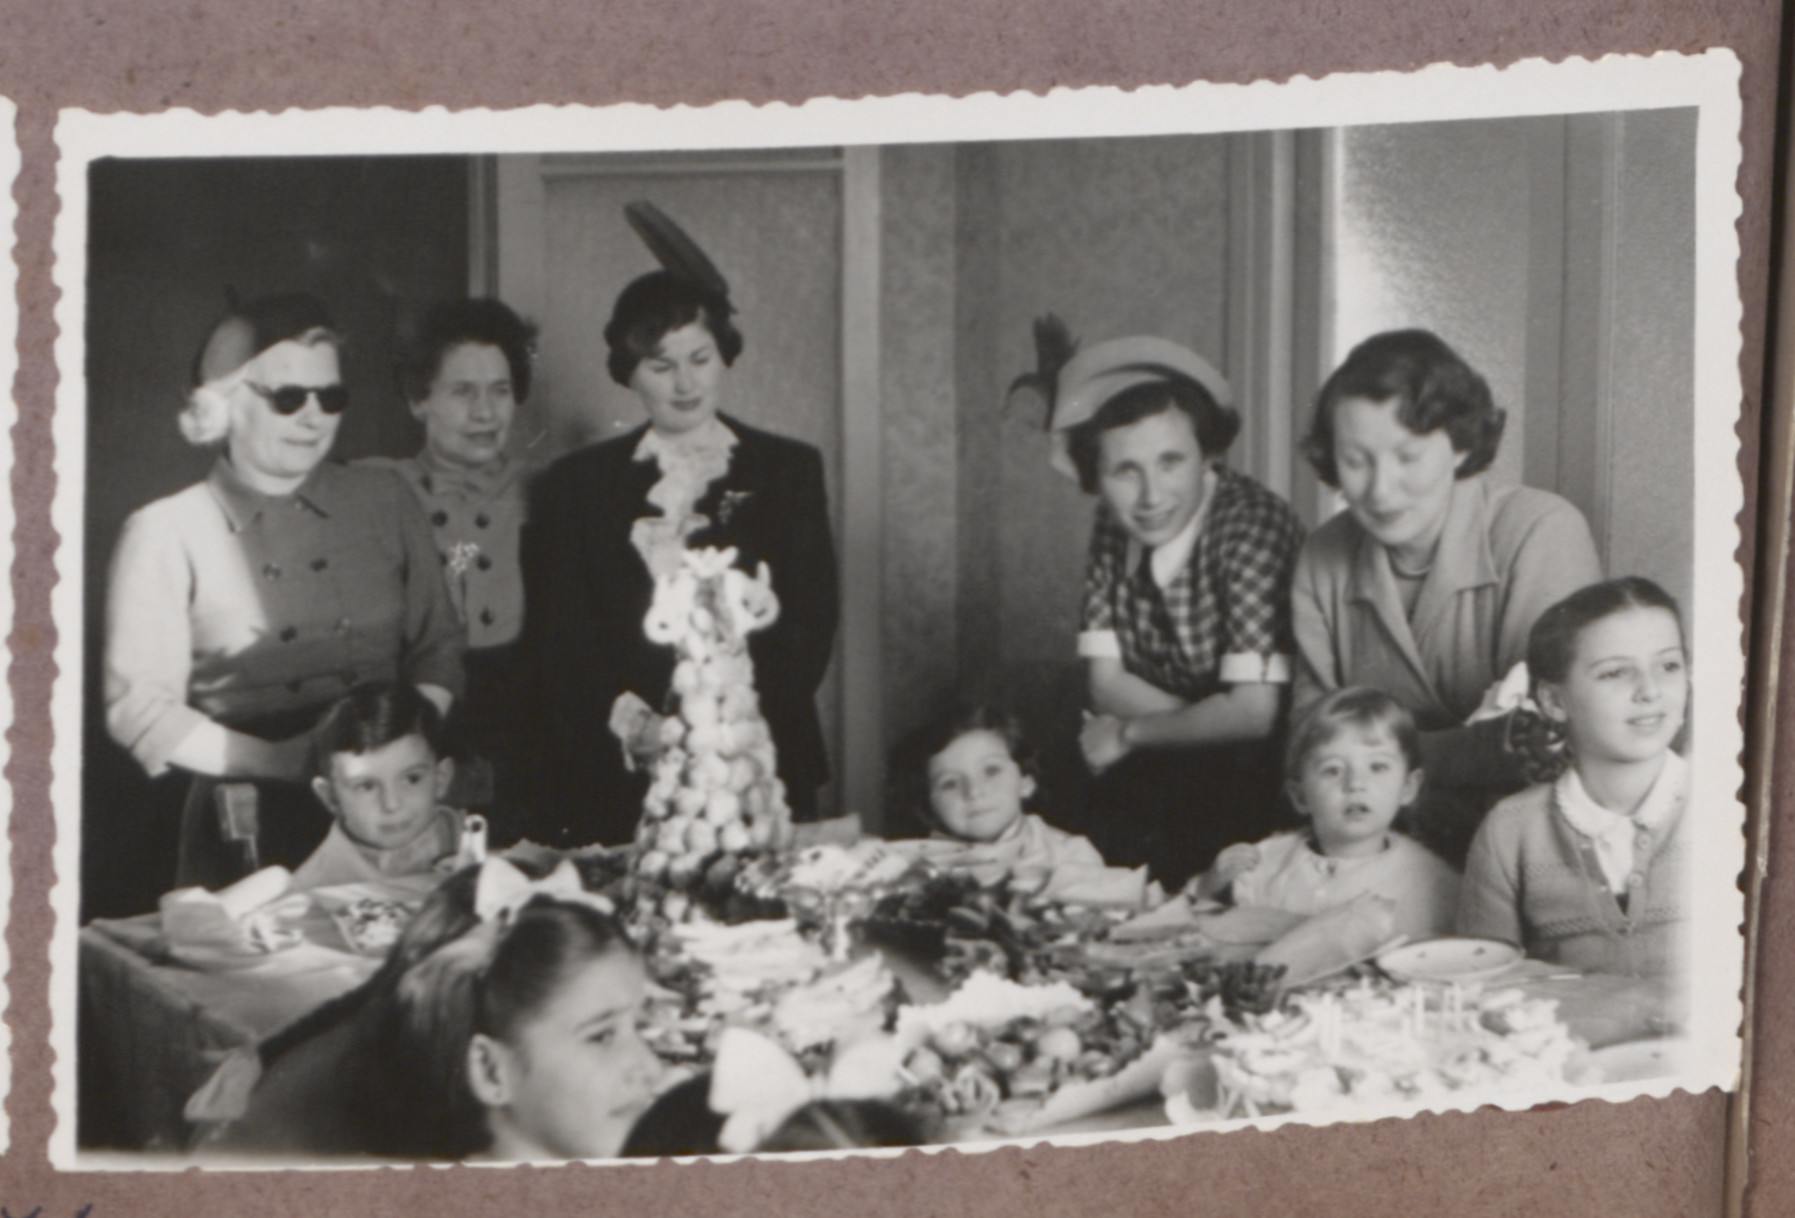 Photo album page showing Daisy Breuer's 7th birthday party with many Hungarian Jewish survivor children in attendance.